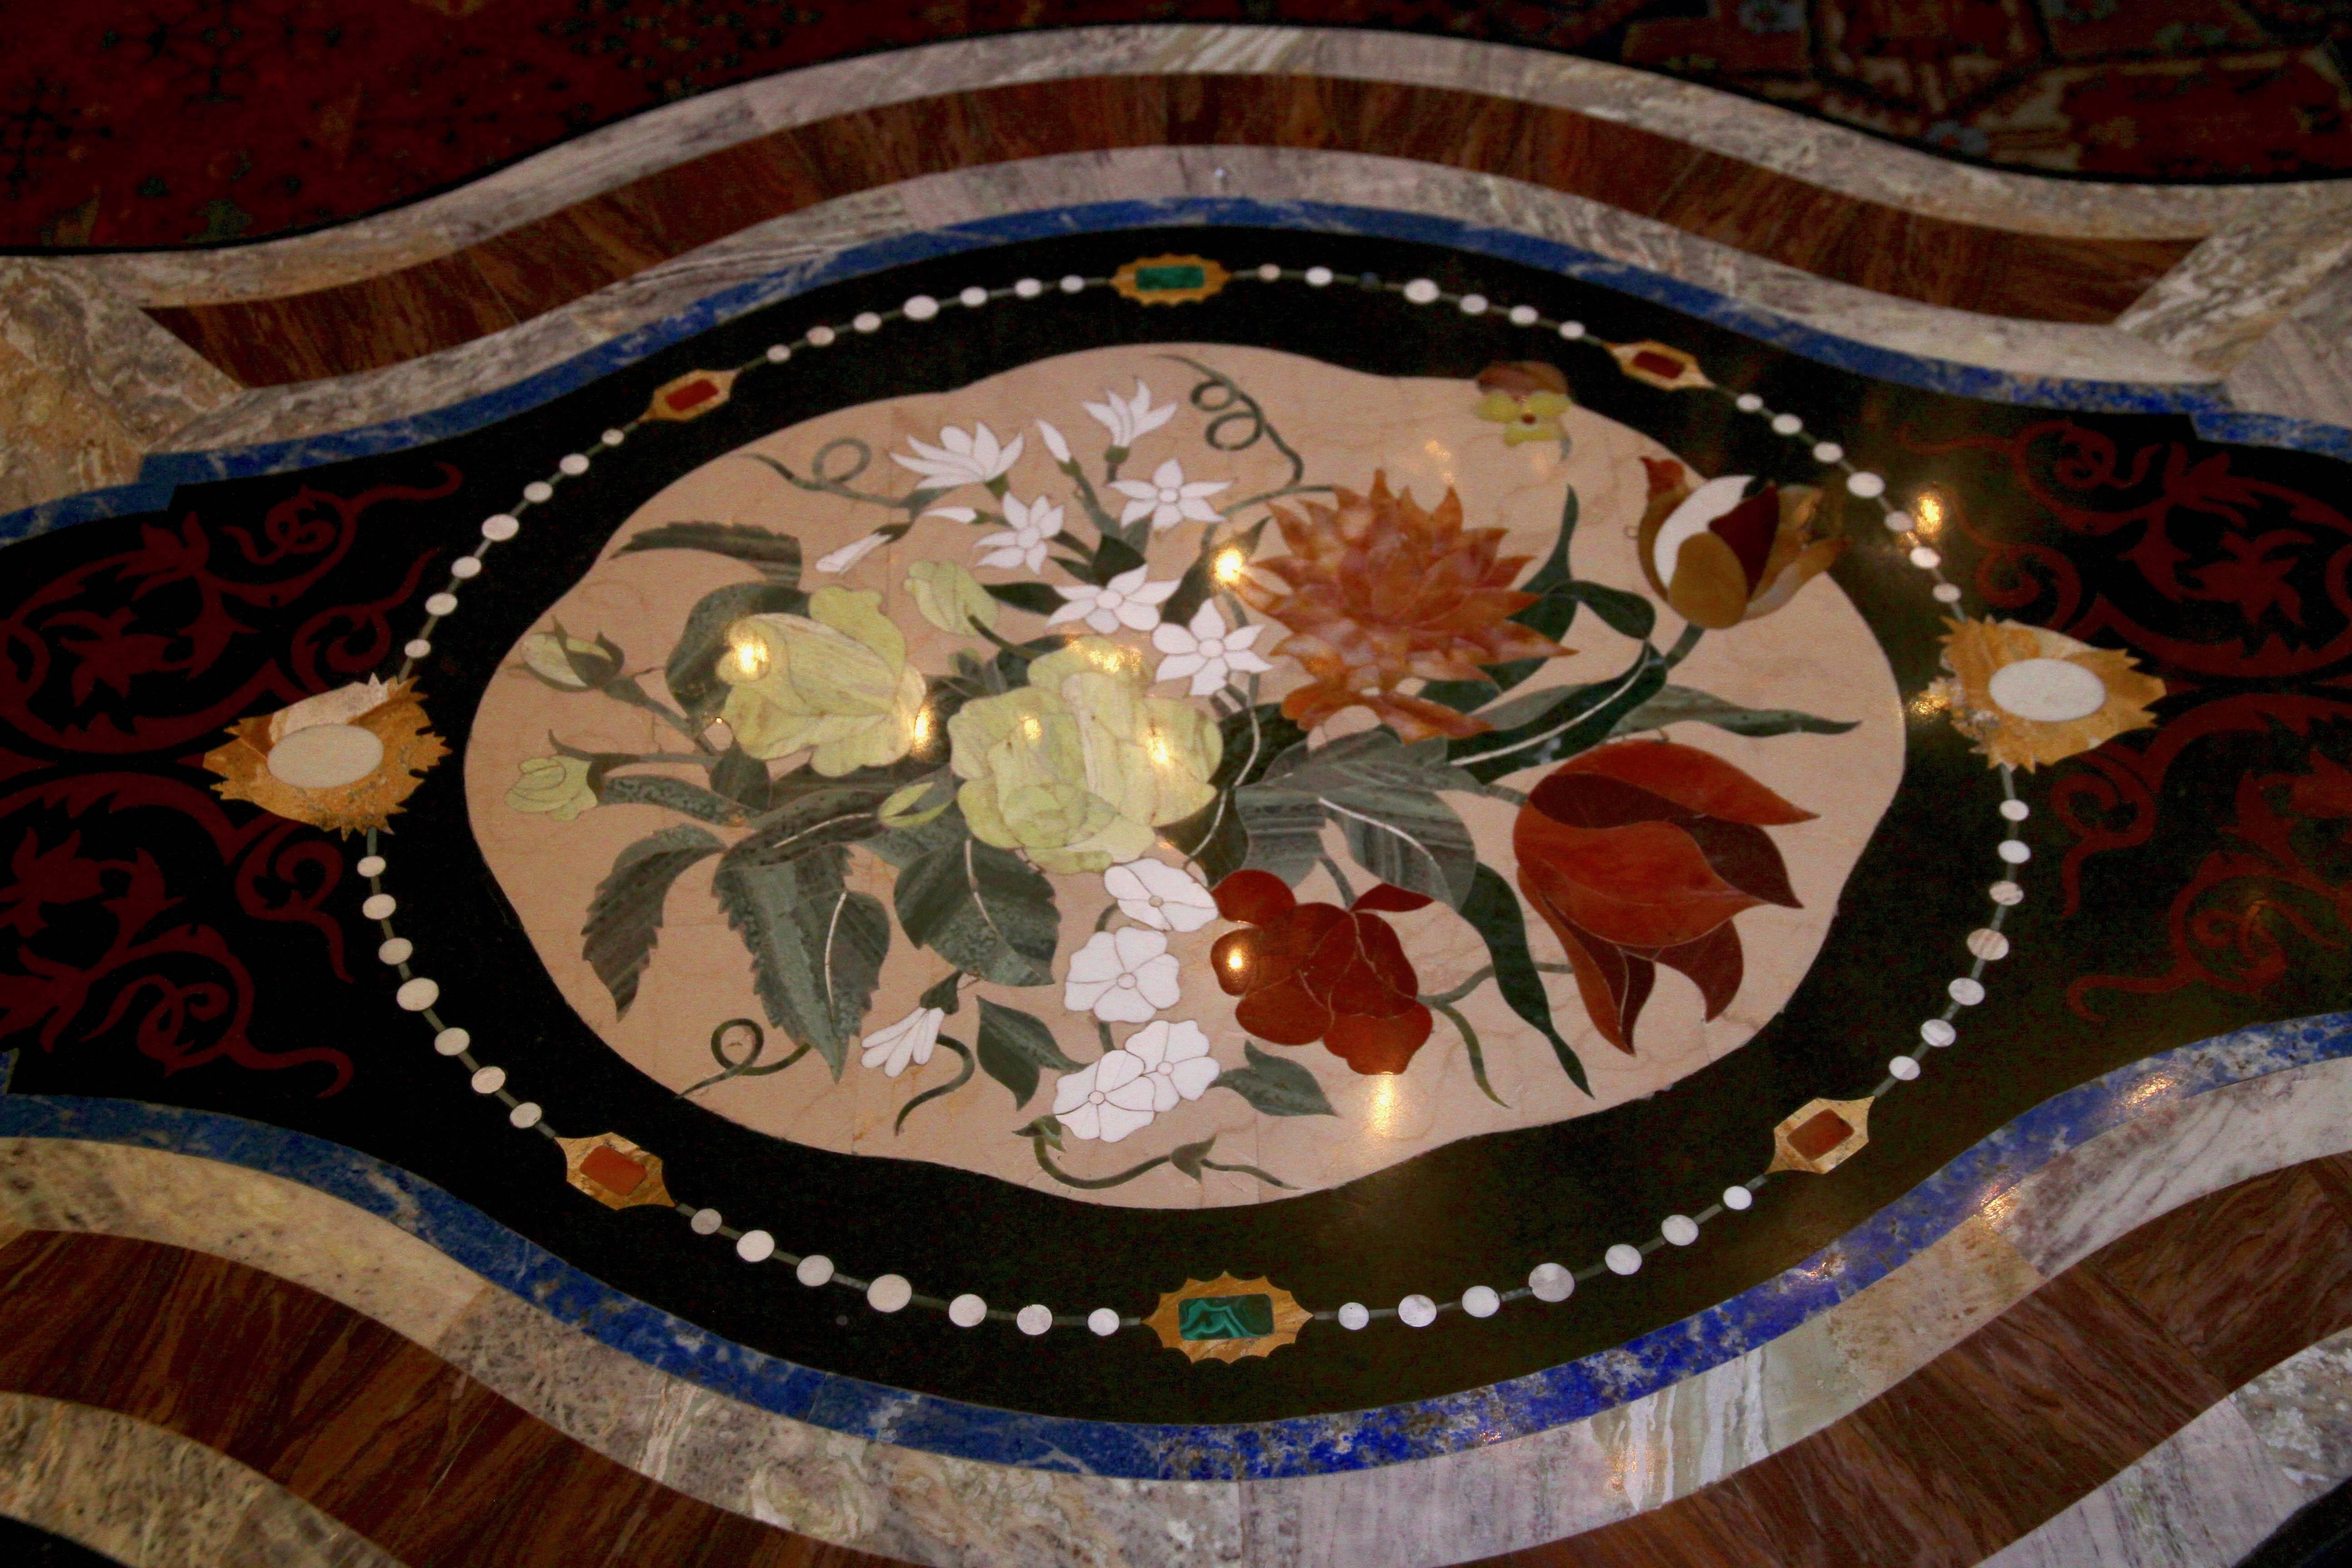 Renaissance Revival Coffee Table in Pietre Dure Marquetery, Italian Artwork, 20th Century For Sale